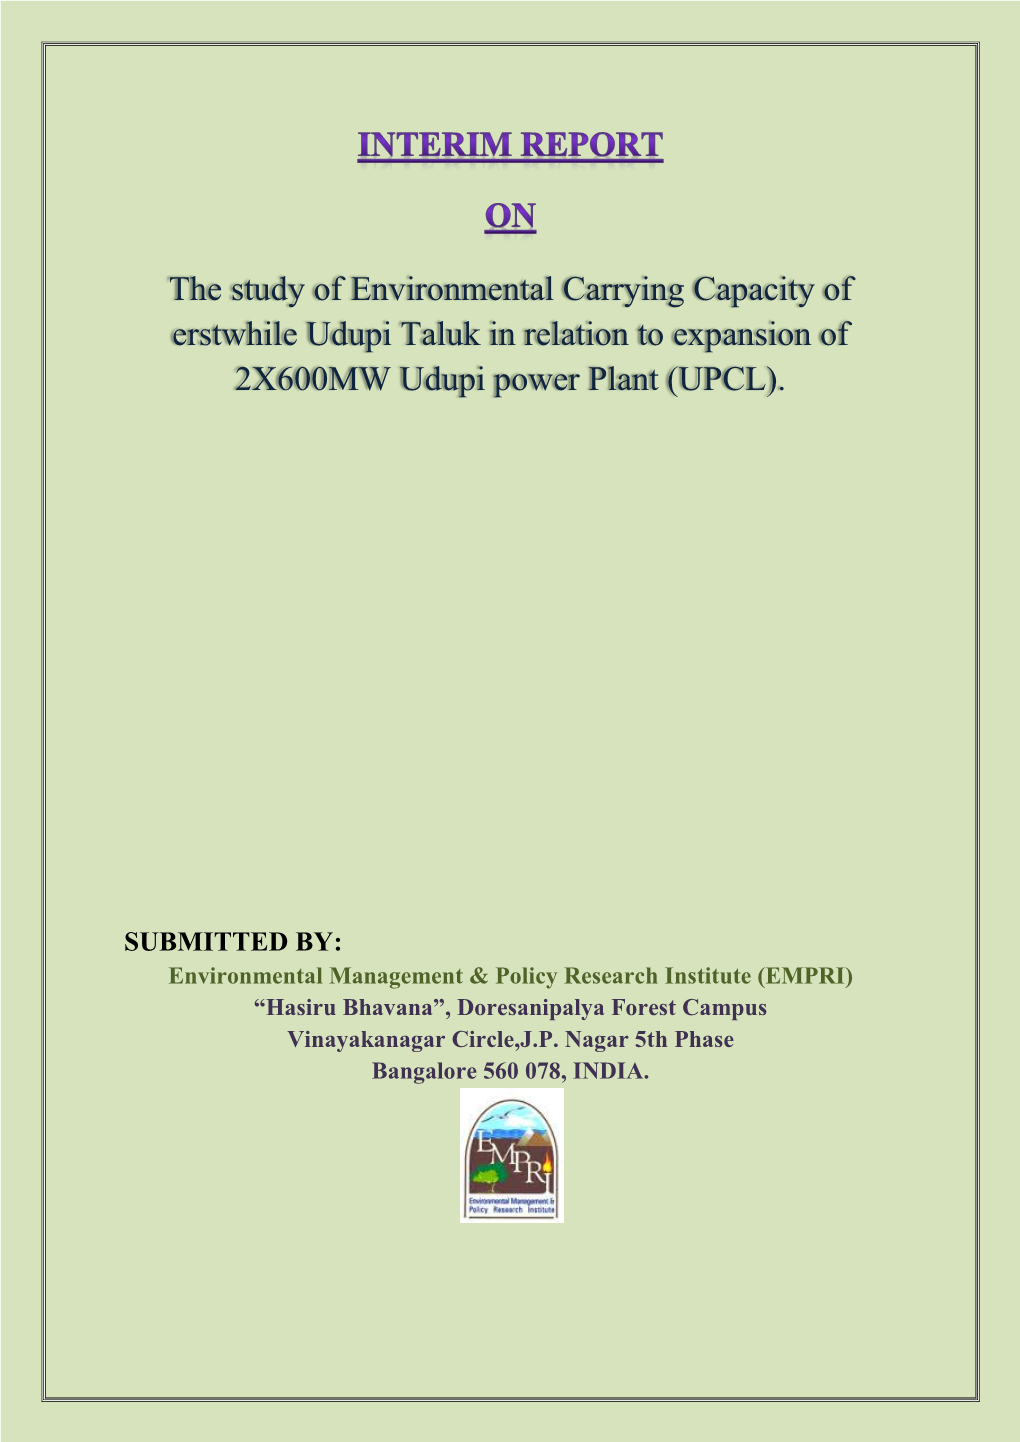 The Study of Environmental Carrying Capacity of Erstwhile Udupi Taluk in Relation to Expansion of 2X600MW Udupi Power Plant (UPCL)